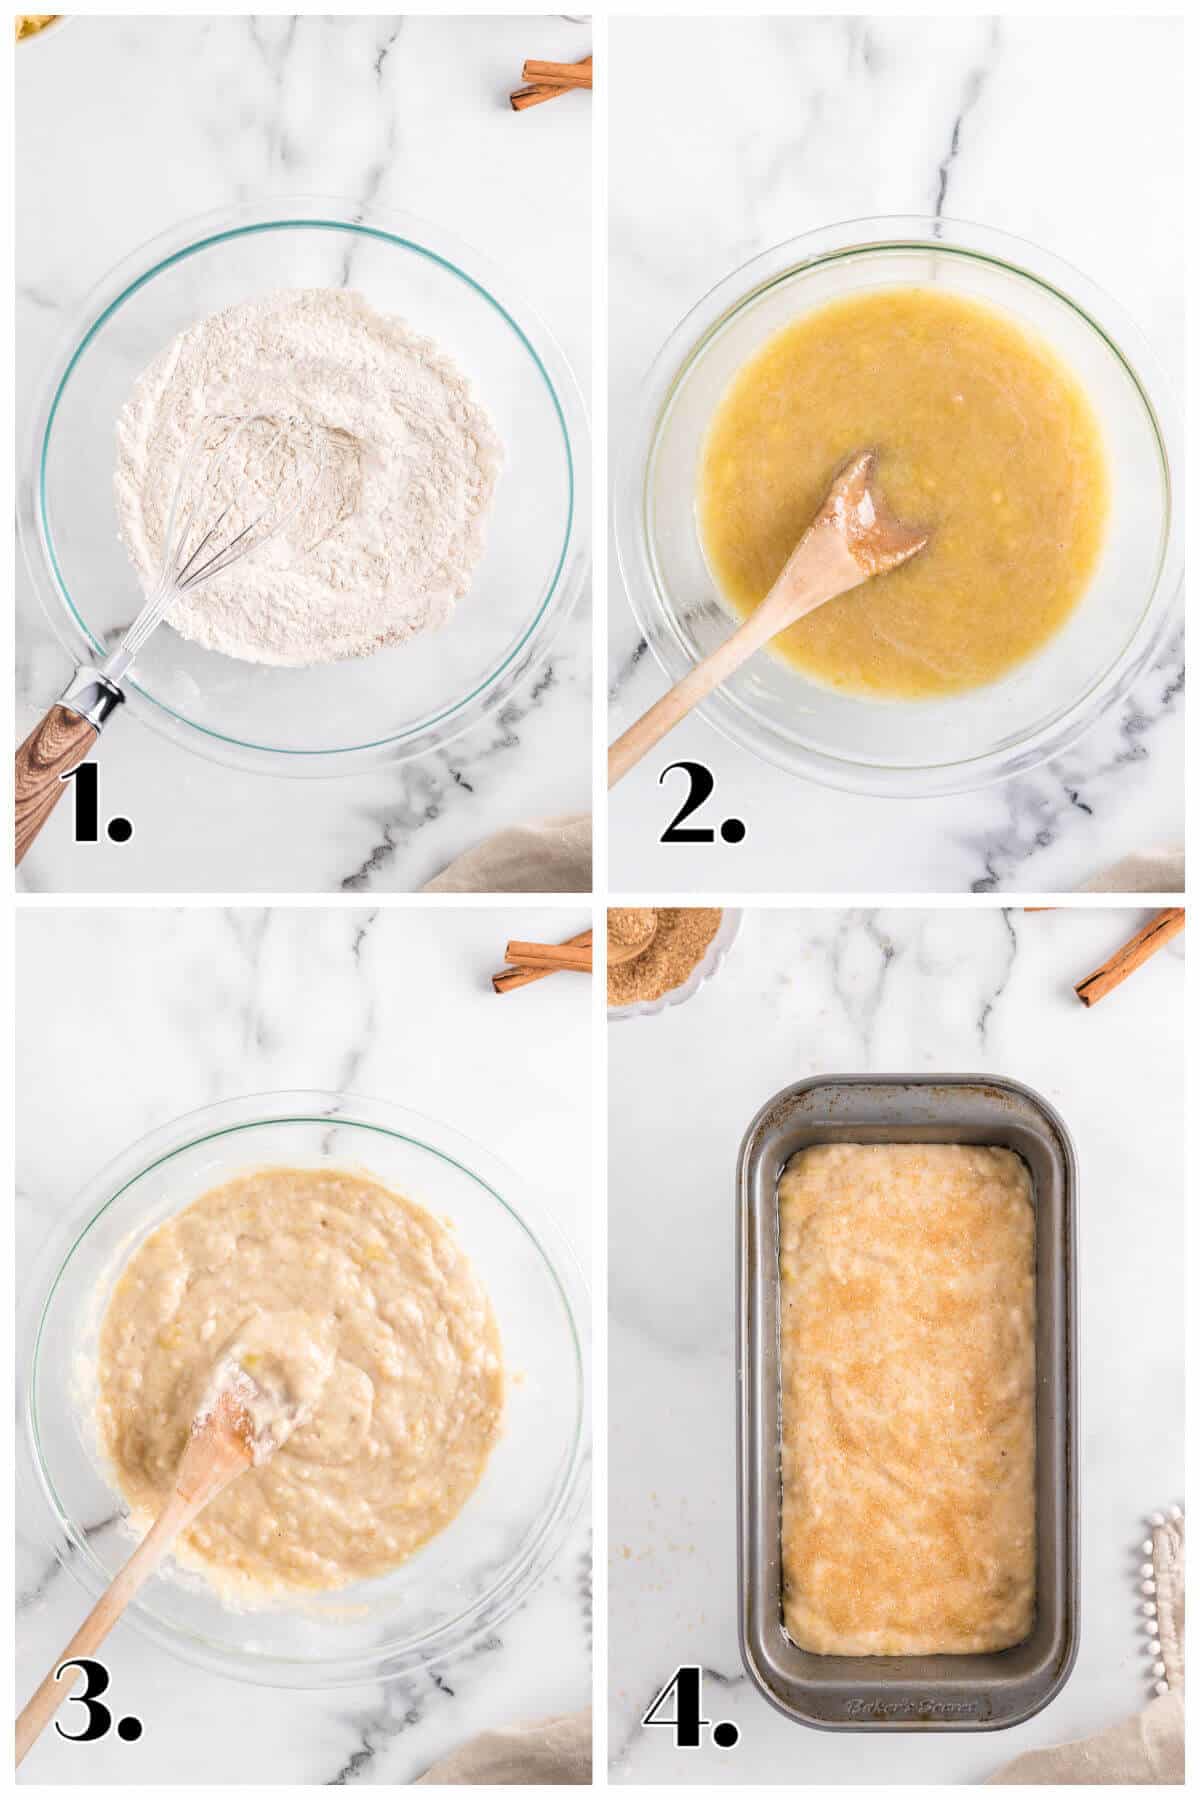 4-picture collage showing steps to making banana bread